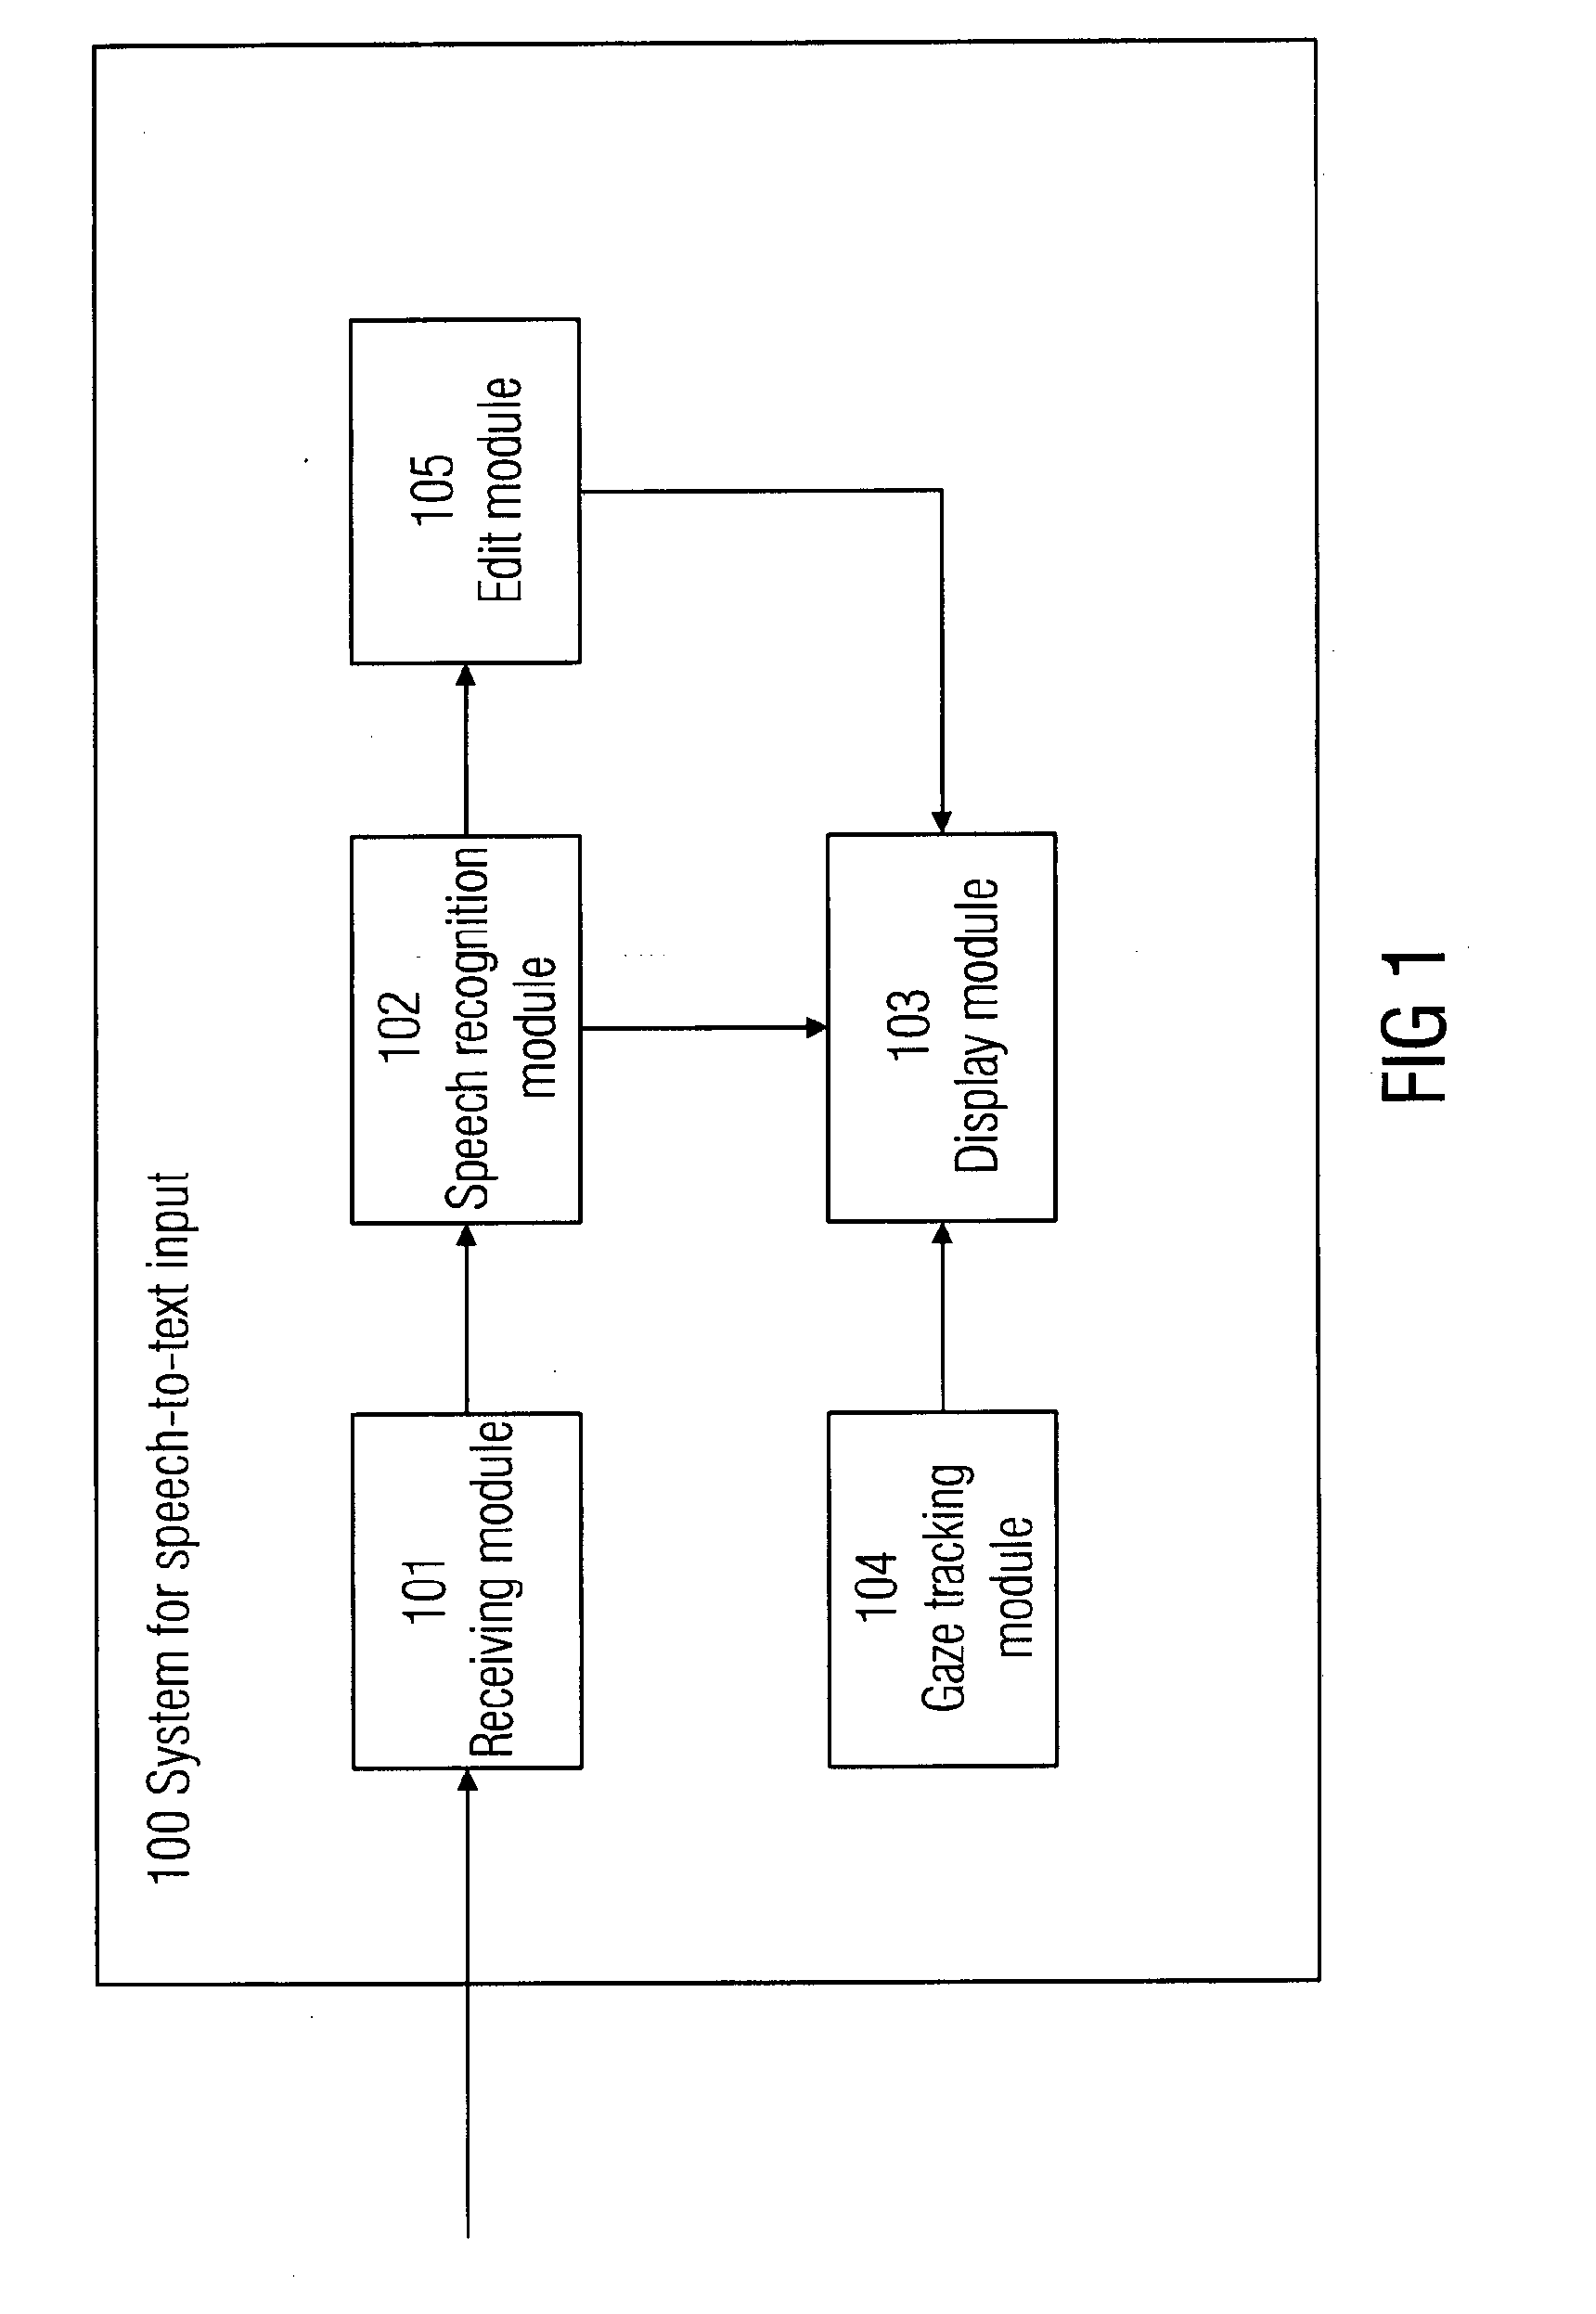 Speech-to-text input method and system combining gaze tracking technology